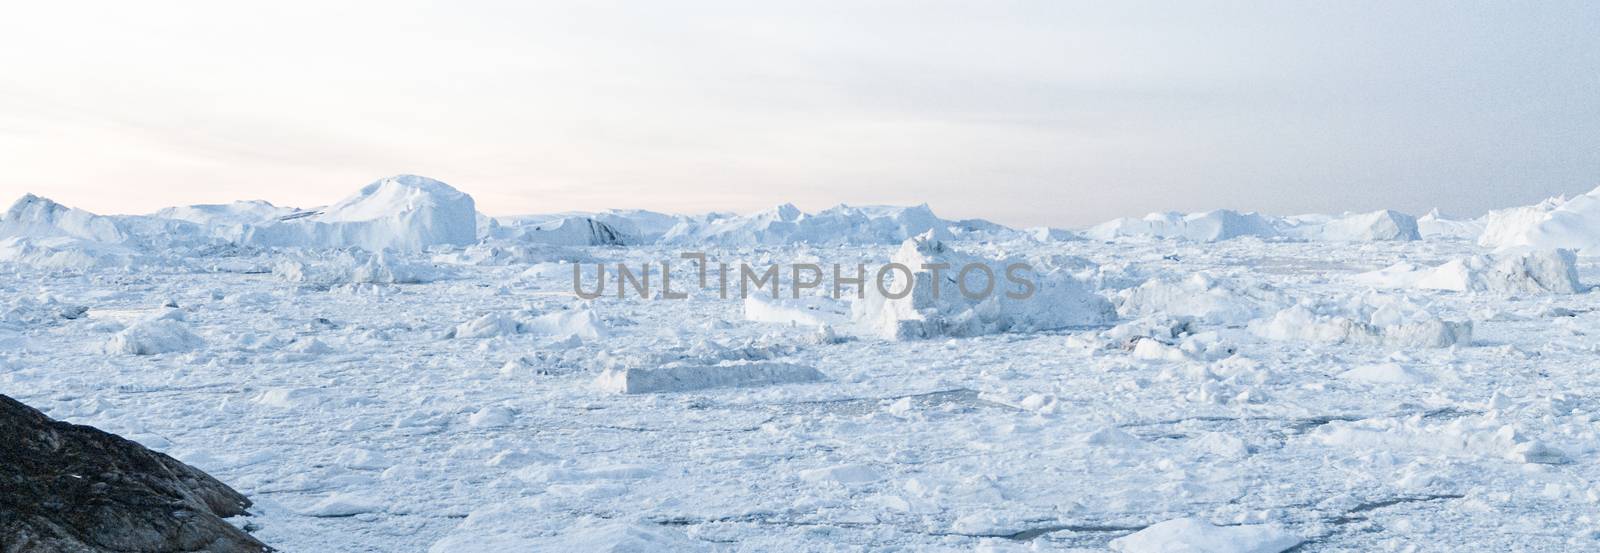 Climate Change Concept. Greenland landscape nature with icebergs and ice in Greenland icefjord. Aerial drone panoramic banner photo of Ilulissat Icefjord with icebergs from Jakobshavn Glacier.